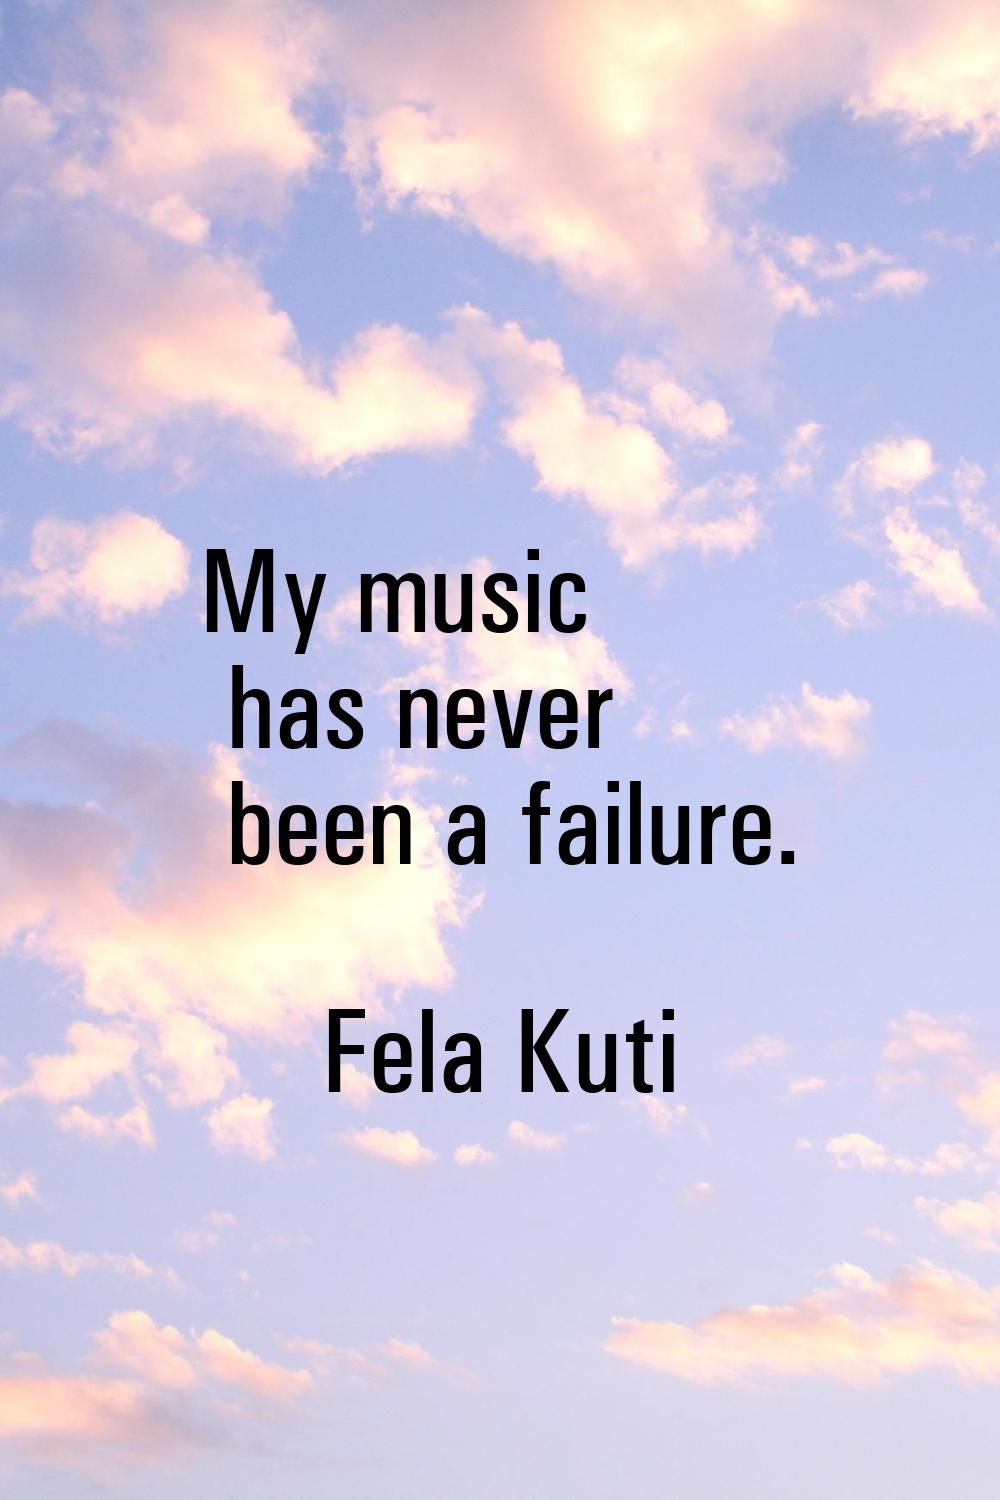 My music has never been a failure.